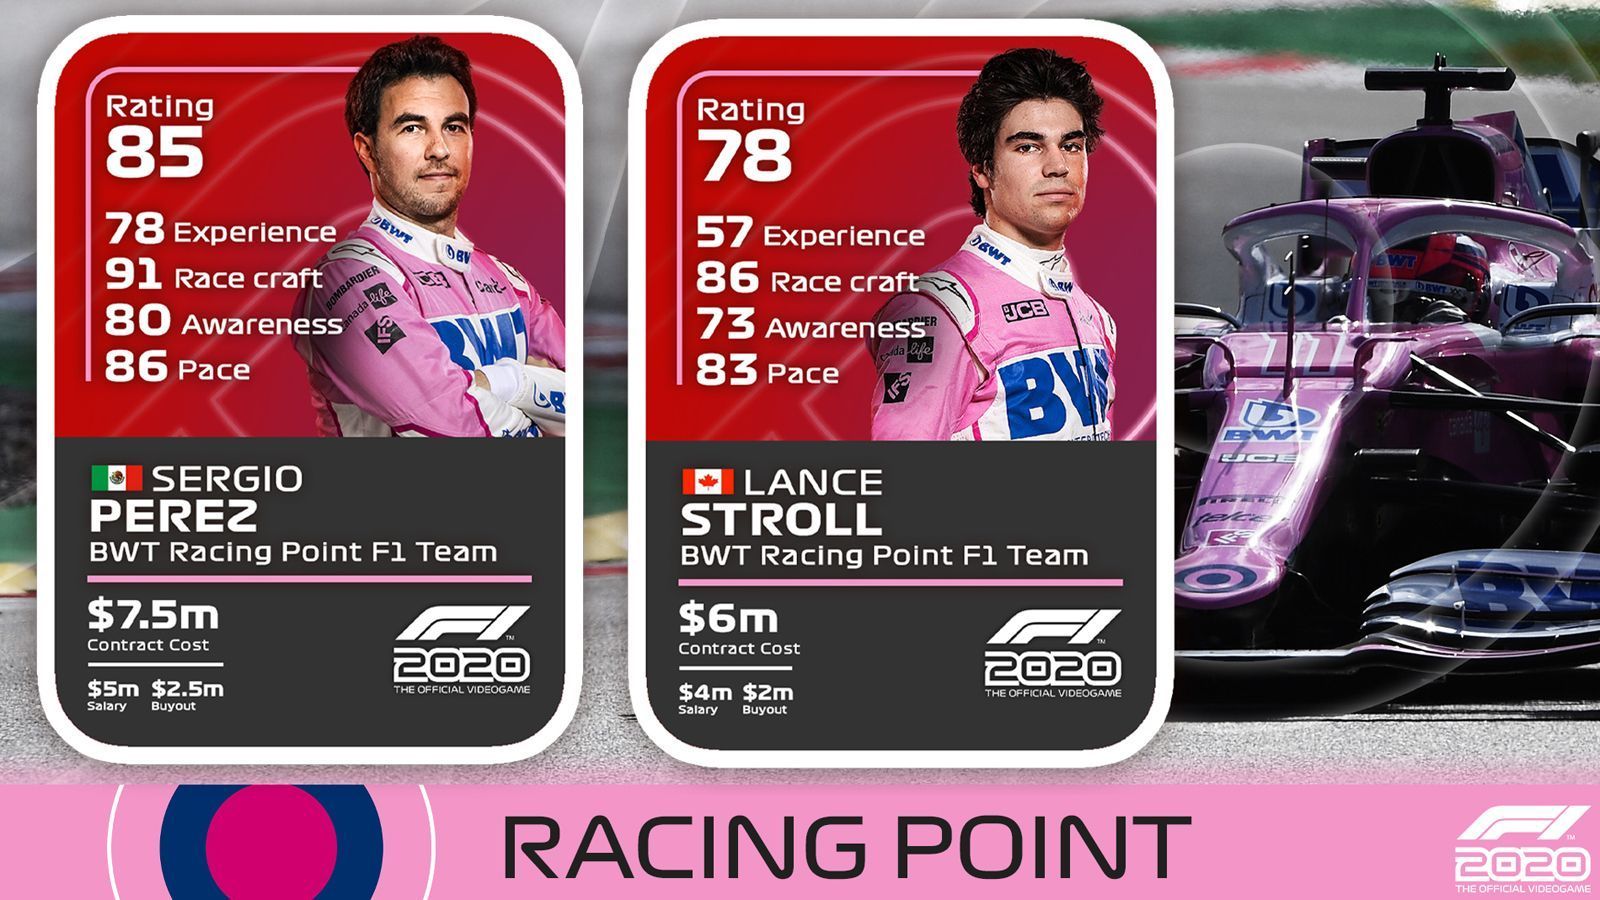 
                <strong>Racing Point</strong><br>
                Sergio Perez: Erfahrung 78, Fahrkunst 91, Bewusstsein 80, Pace 86, Overall Rating 85Lance Stroll: Erfahrung 57, Fahrkunst 86, Bewusstsein 73, Pace 83, Overall Rating 78
              